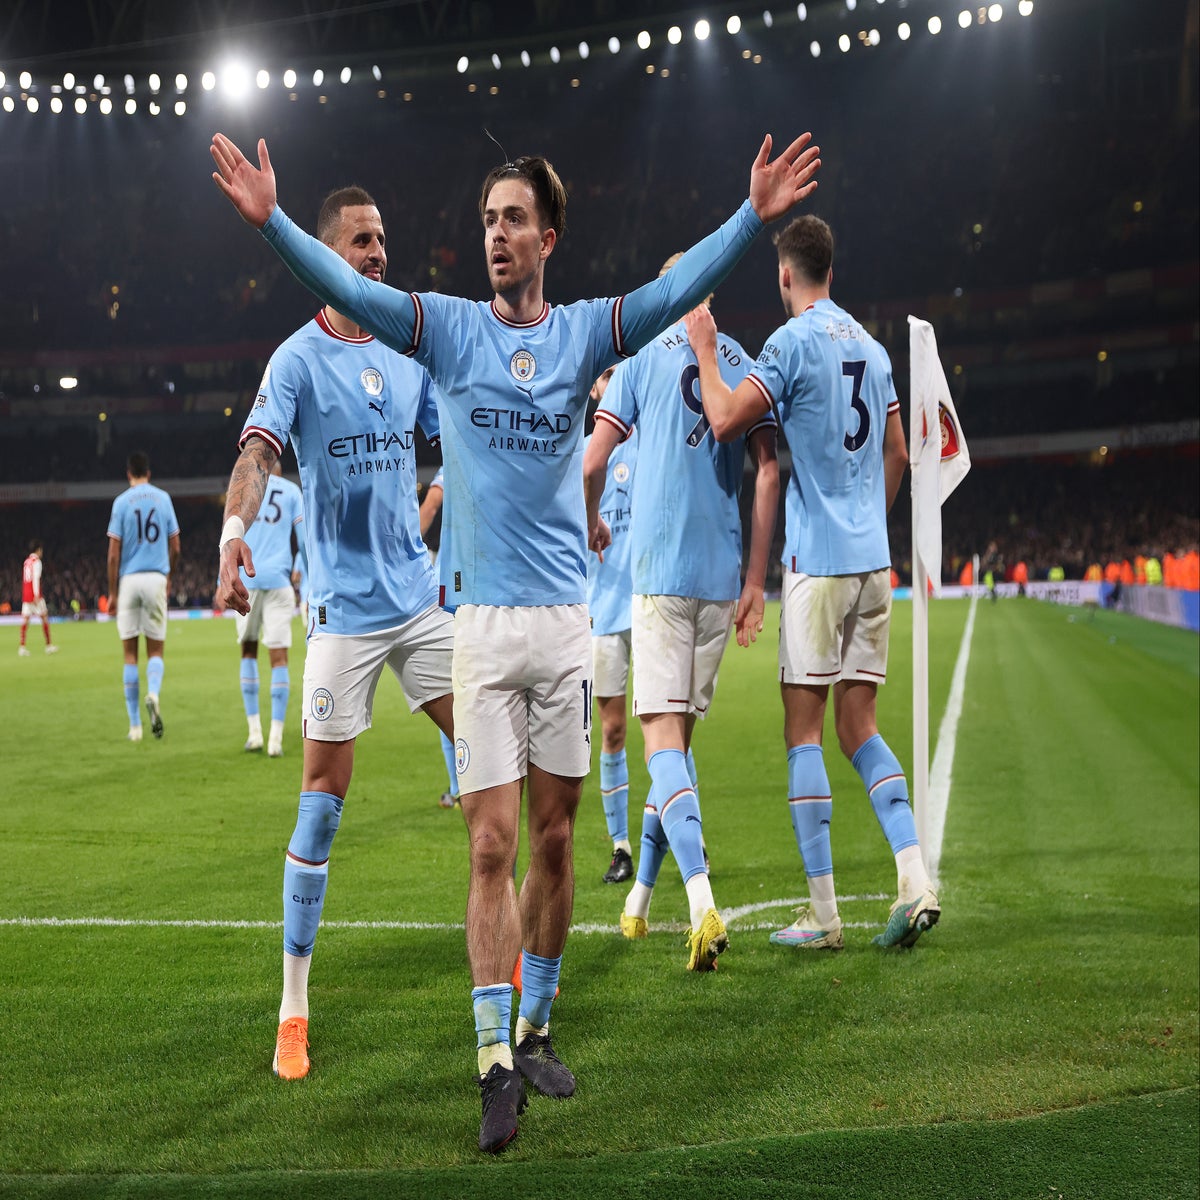 We're teaming up with top football club Manchester City